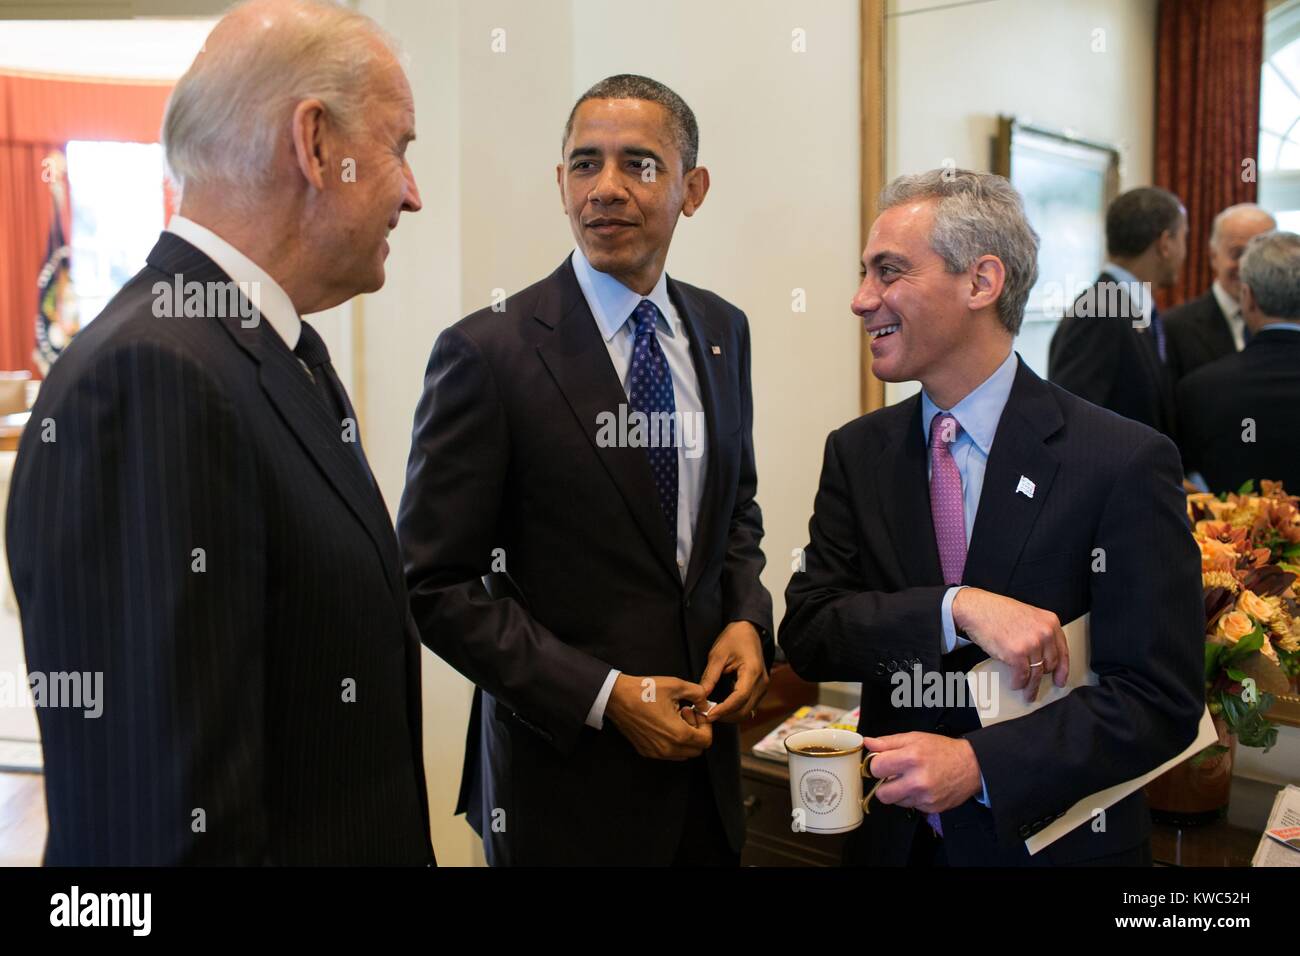 President Barack Obama and VP Joe Biden with newly elected Chicago Mayor Rahm Emanuel. Outer Oval Office, Nov. 16, 2012, shortly after Emanuel's election as Chicago's Mayor. (BSLOC 2015 13 255) Stock Photo